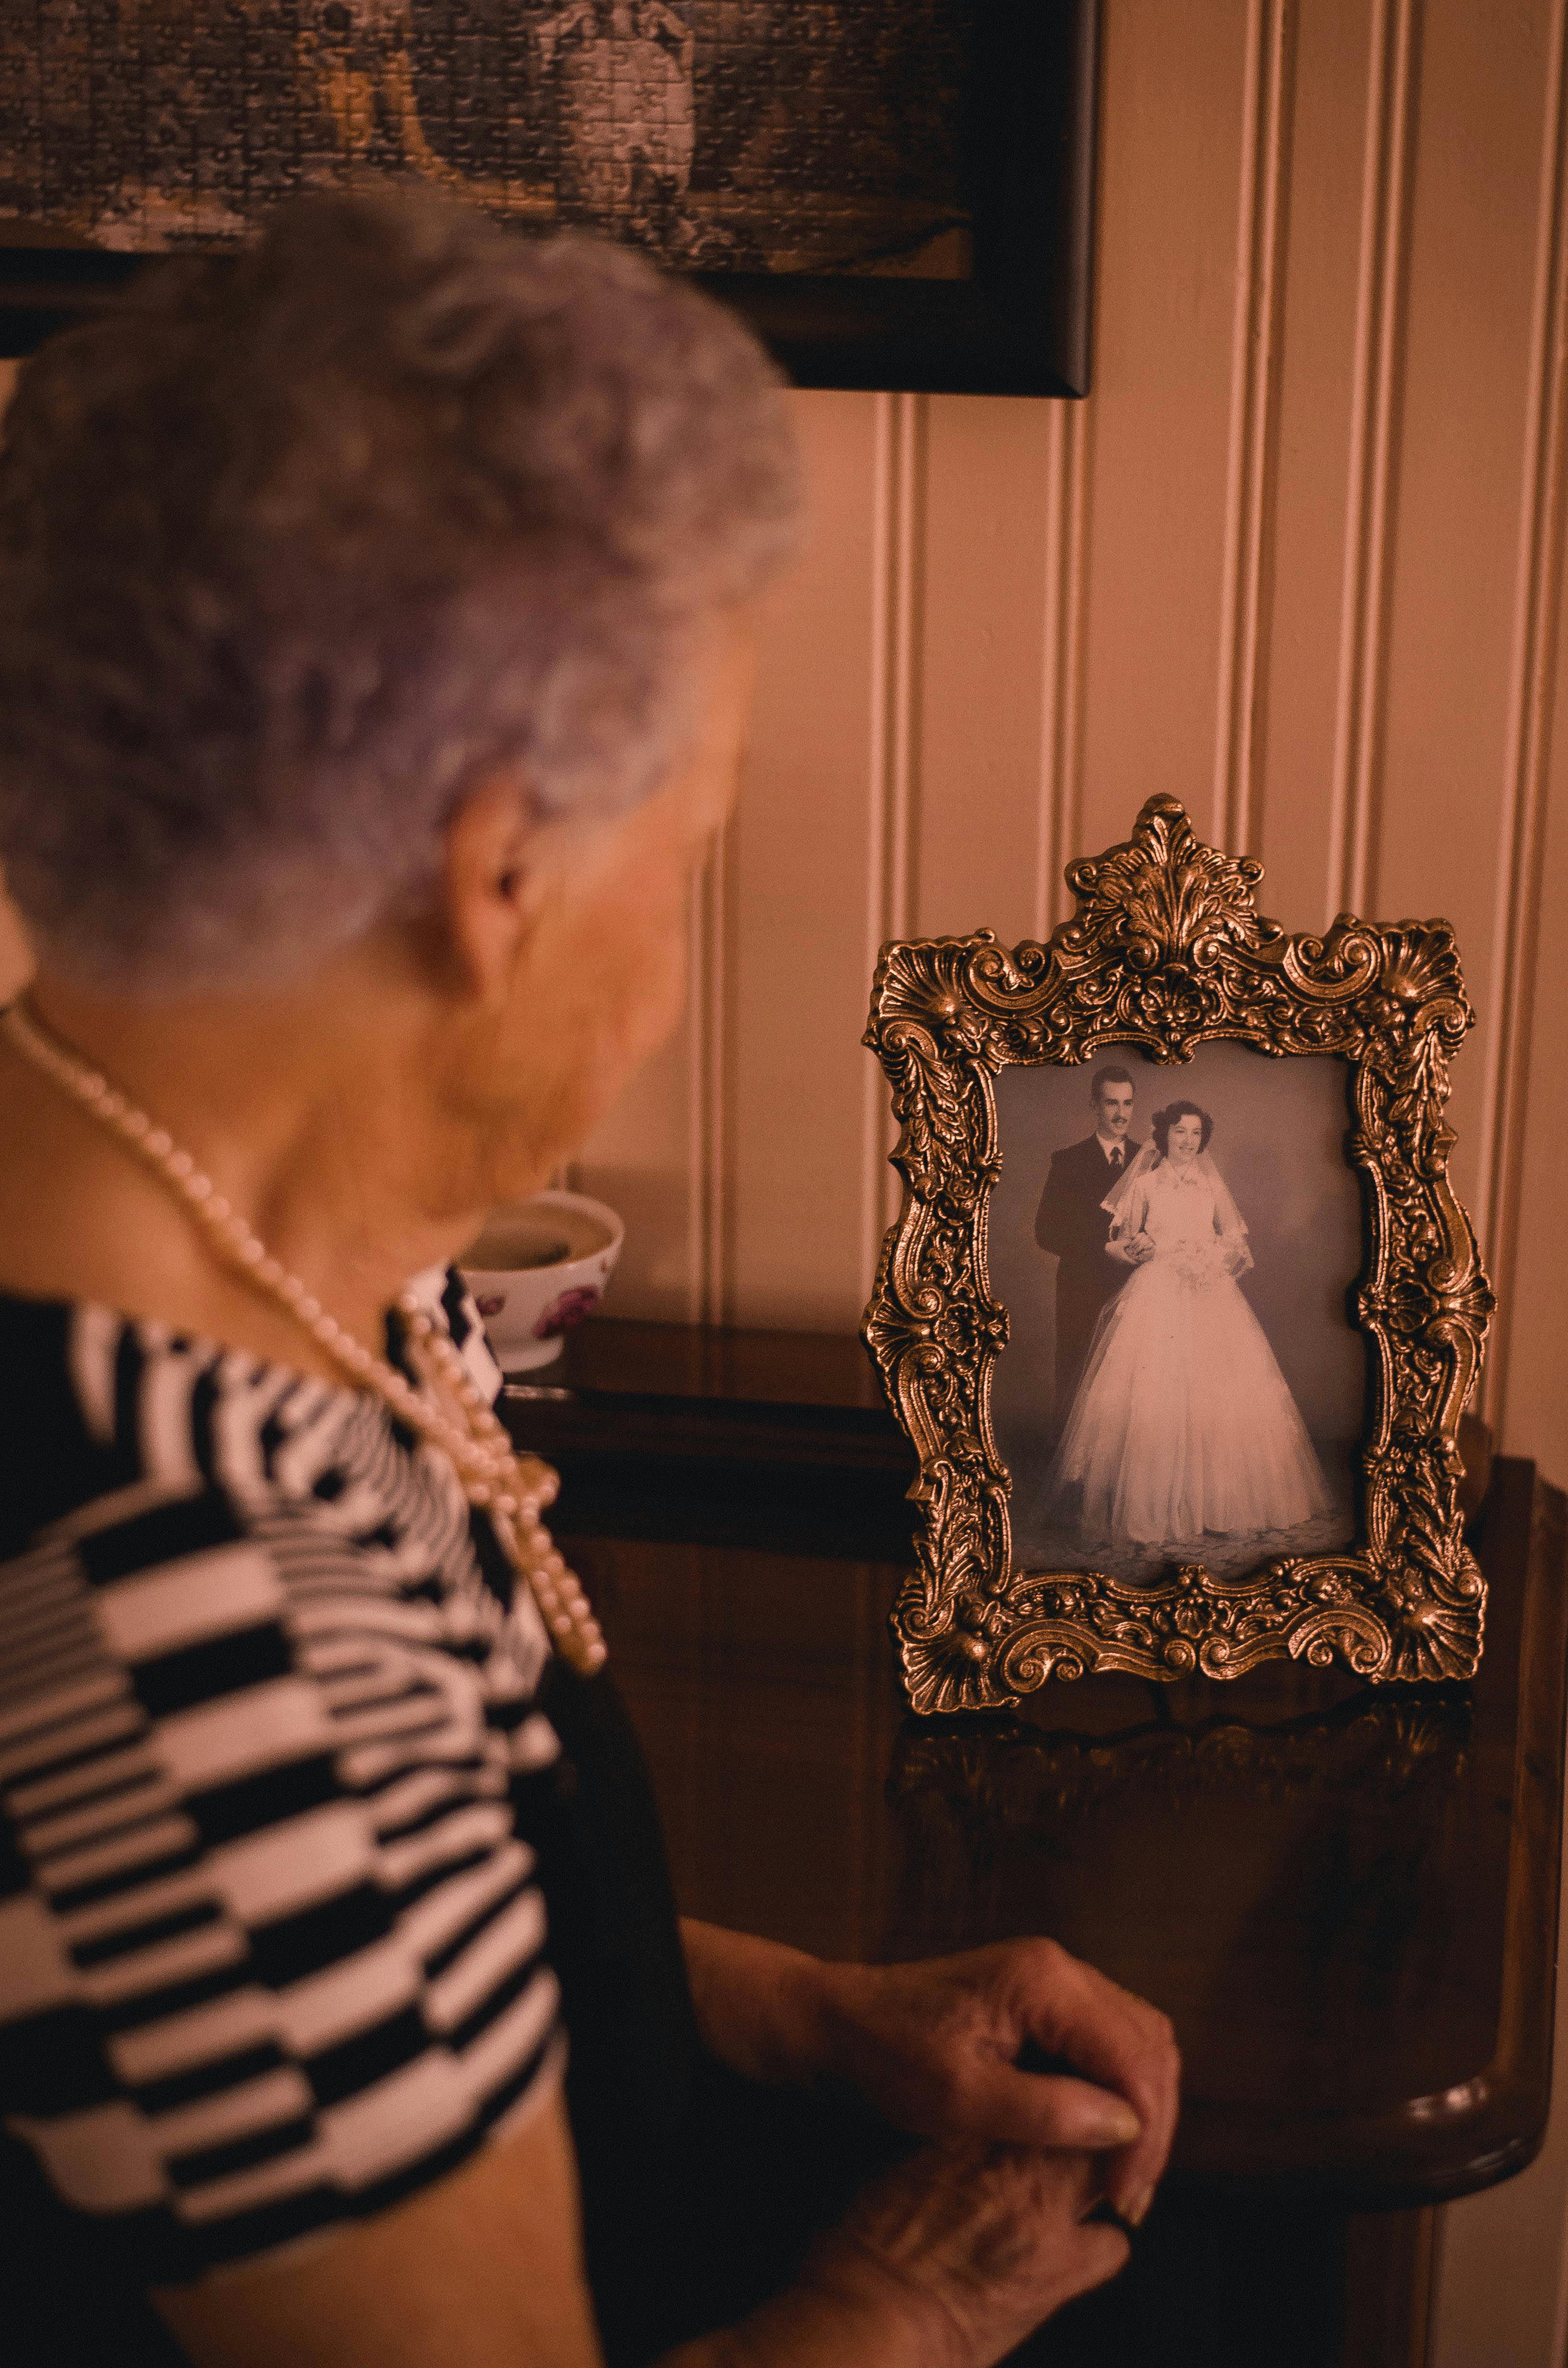 An old woman standing near the photo frame | Photo: Pexels